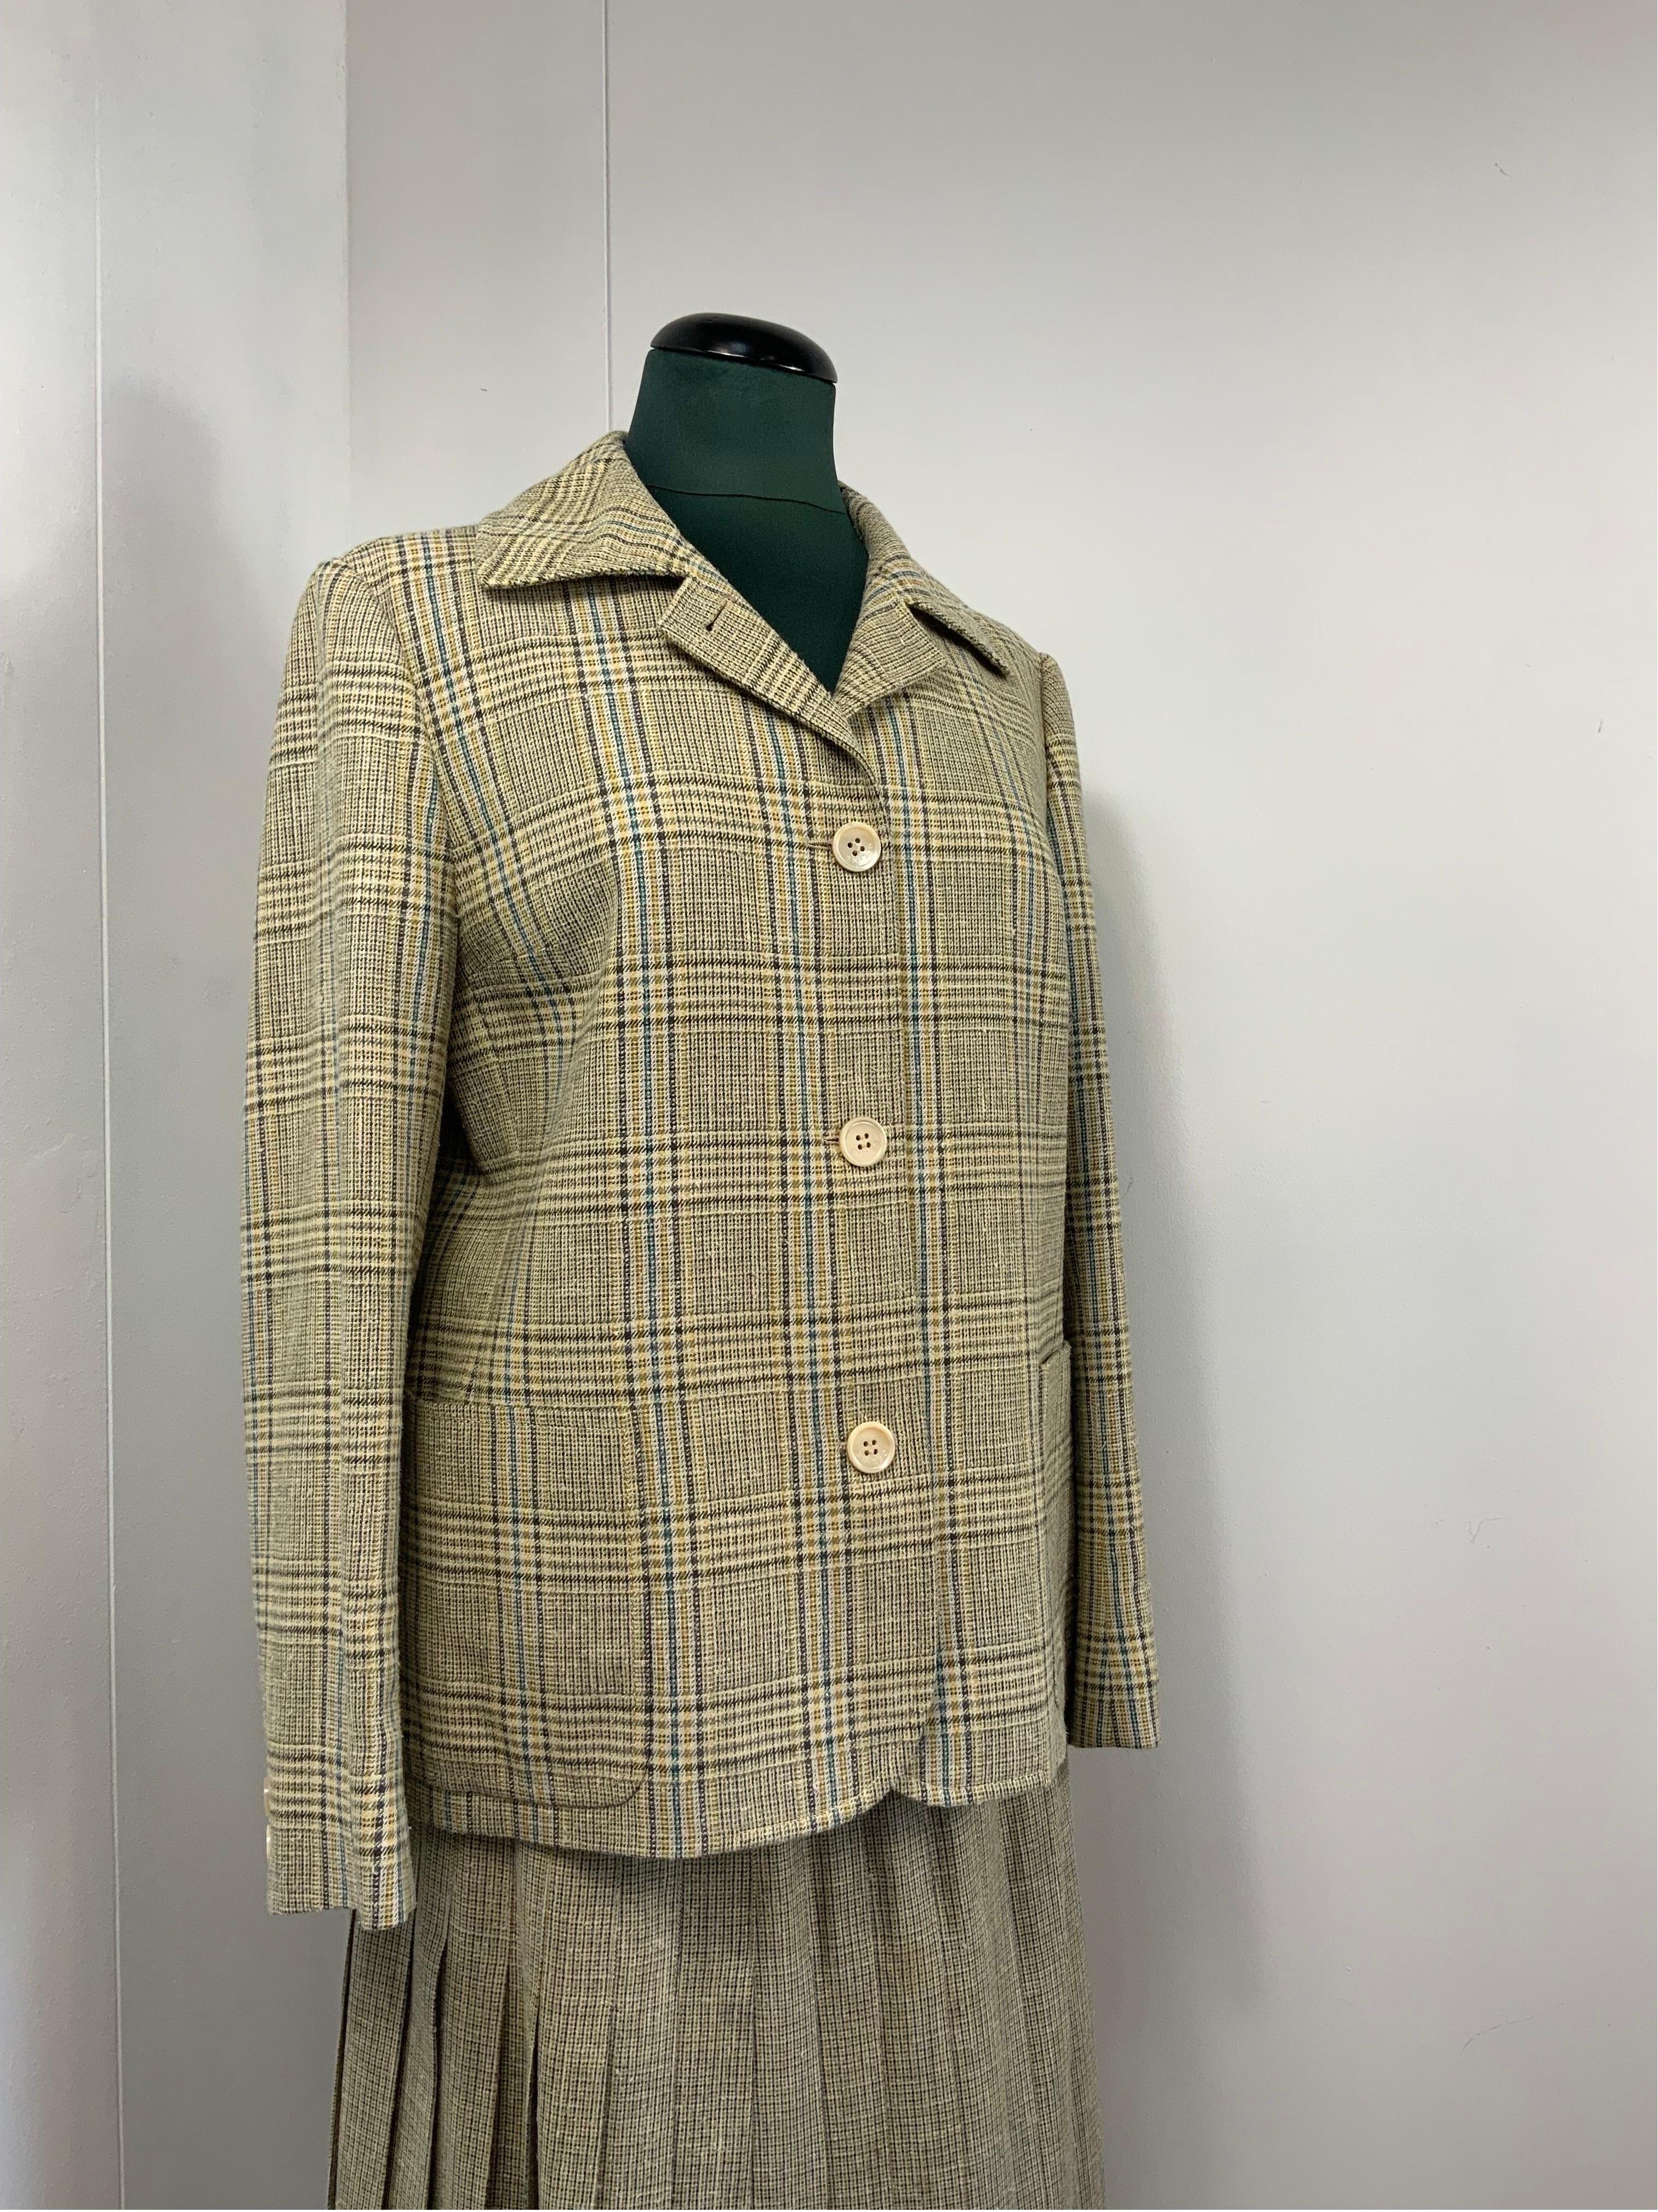 CELINE VINTAGE SUIT
Jacket + skirt.
In 100% wool. In shades of green.
Italian size 46.
The jacket measures
Shoulders 46 cm
Bust 50 cm
Length 69 cm
The skirt closes with a back zip.
Waist 40 cm
Length 68 cm
Excellent overall condition with minimal